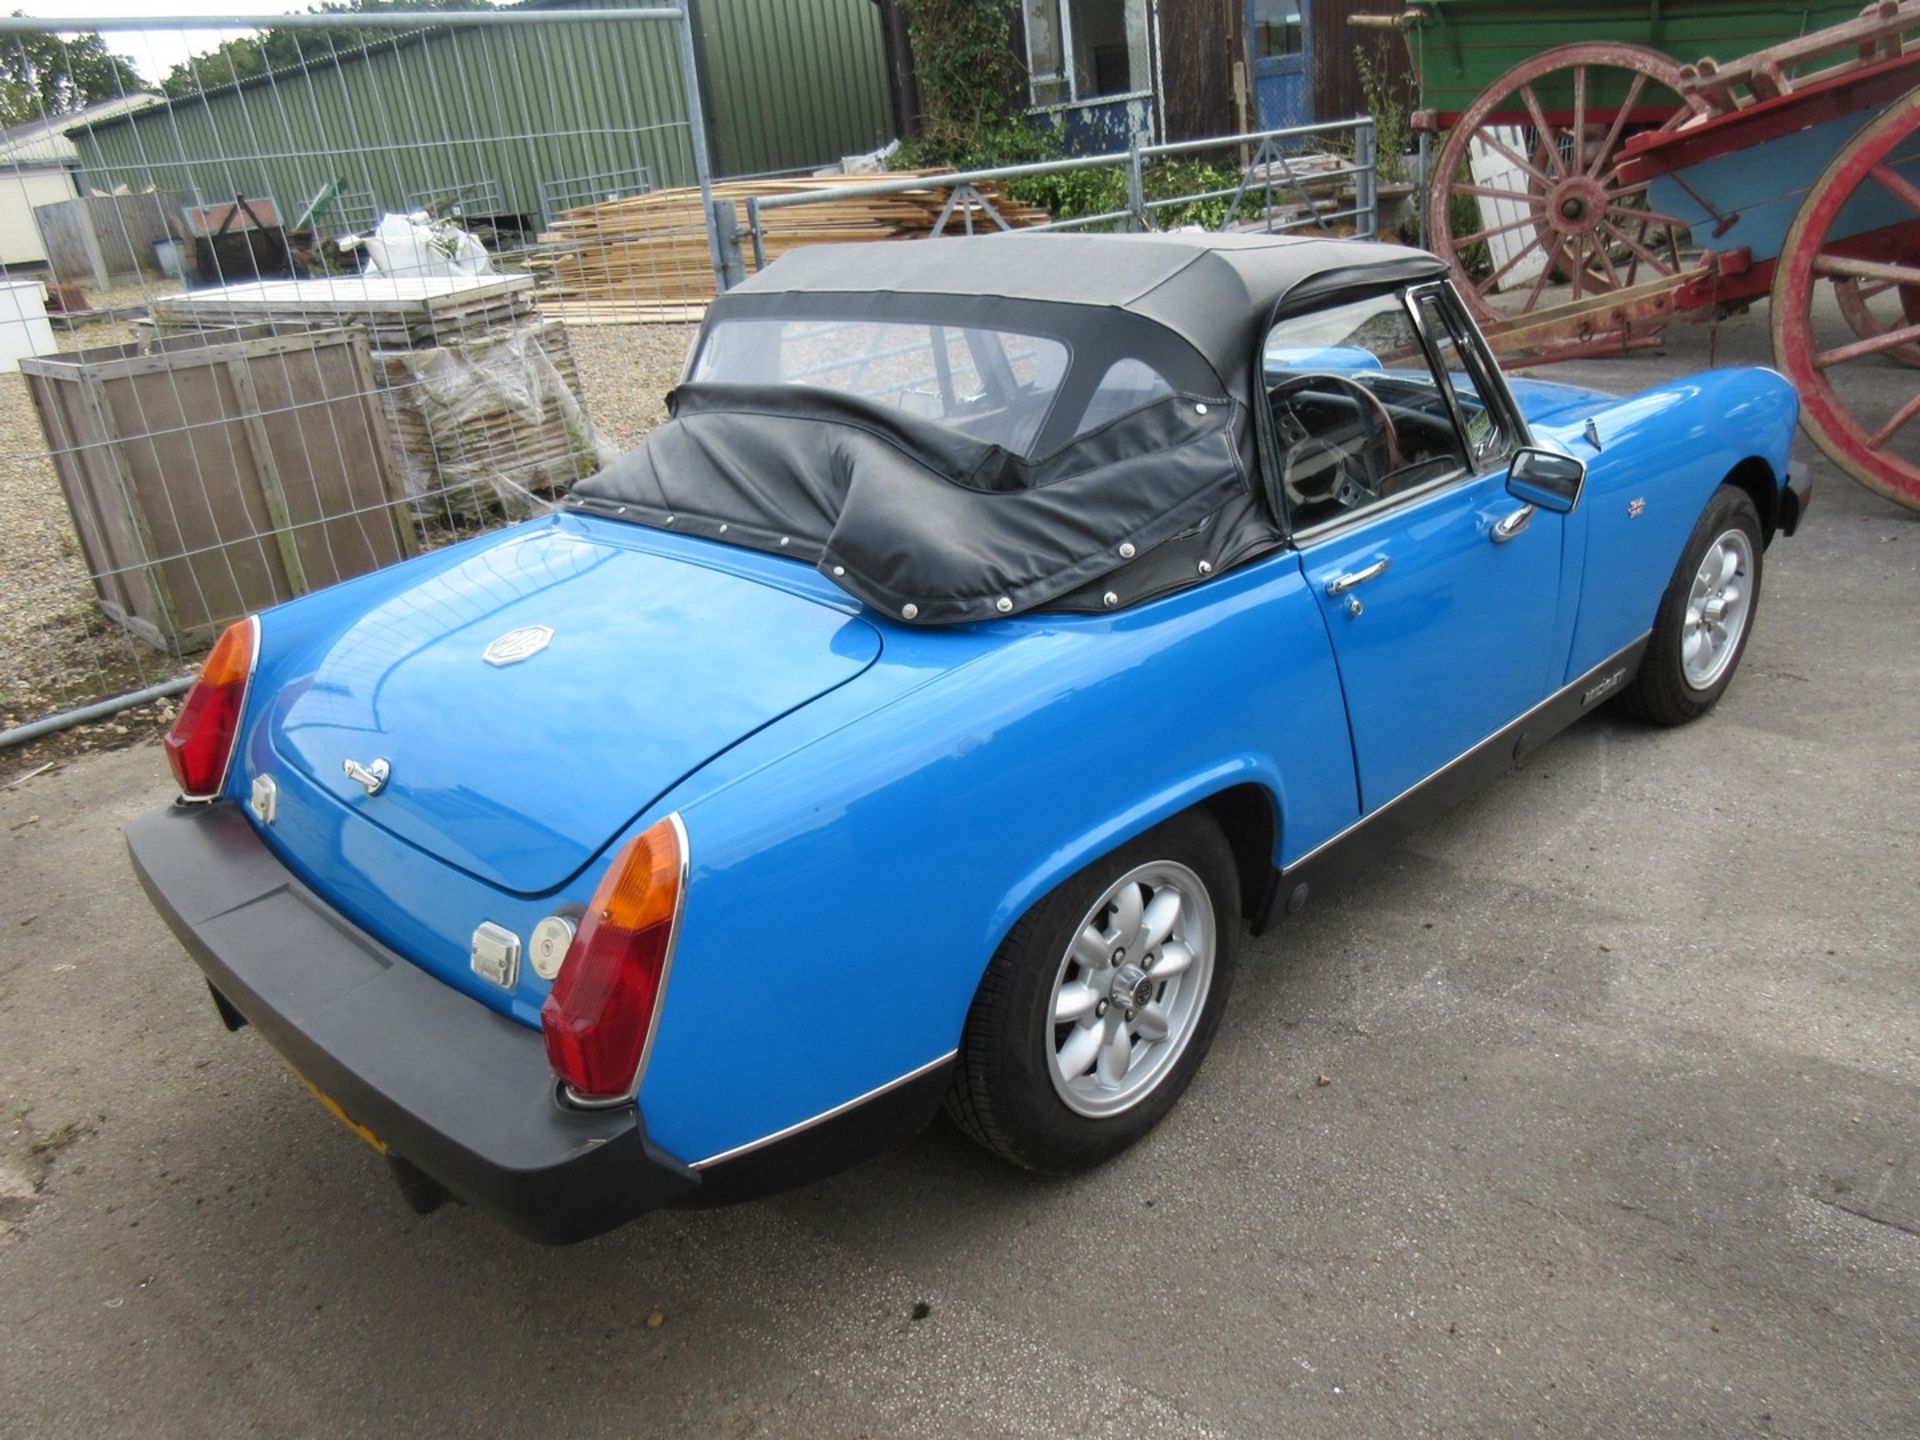 1979 MG Midget 1500 Car, 55000 miles from new, MOT until April 2020, walnut dash and steering wheel - Image 4 of 5